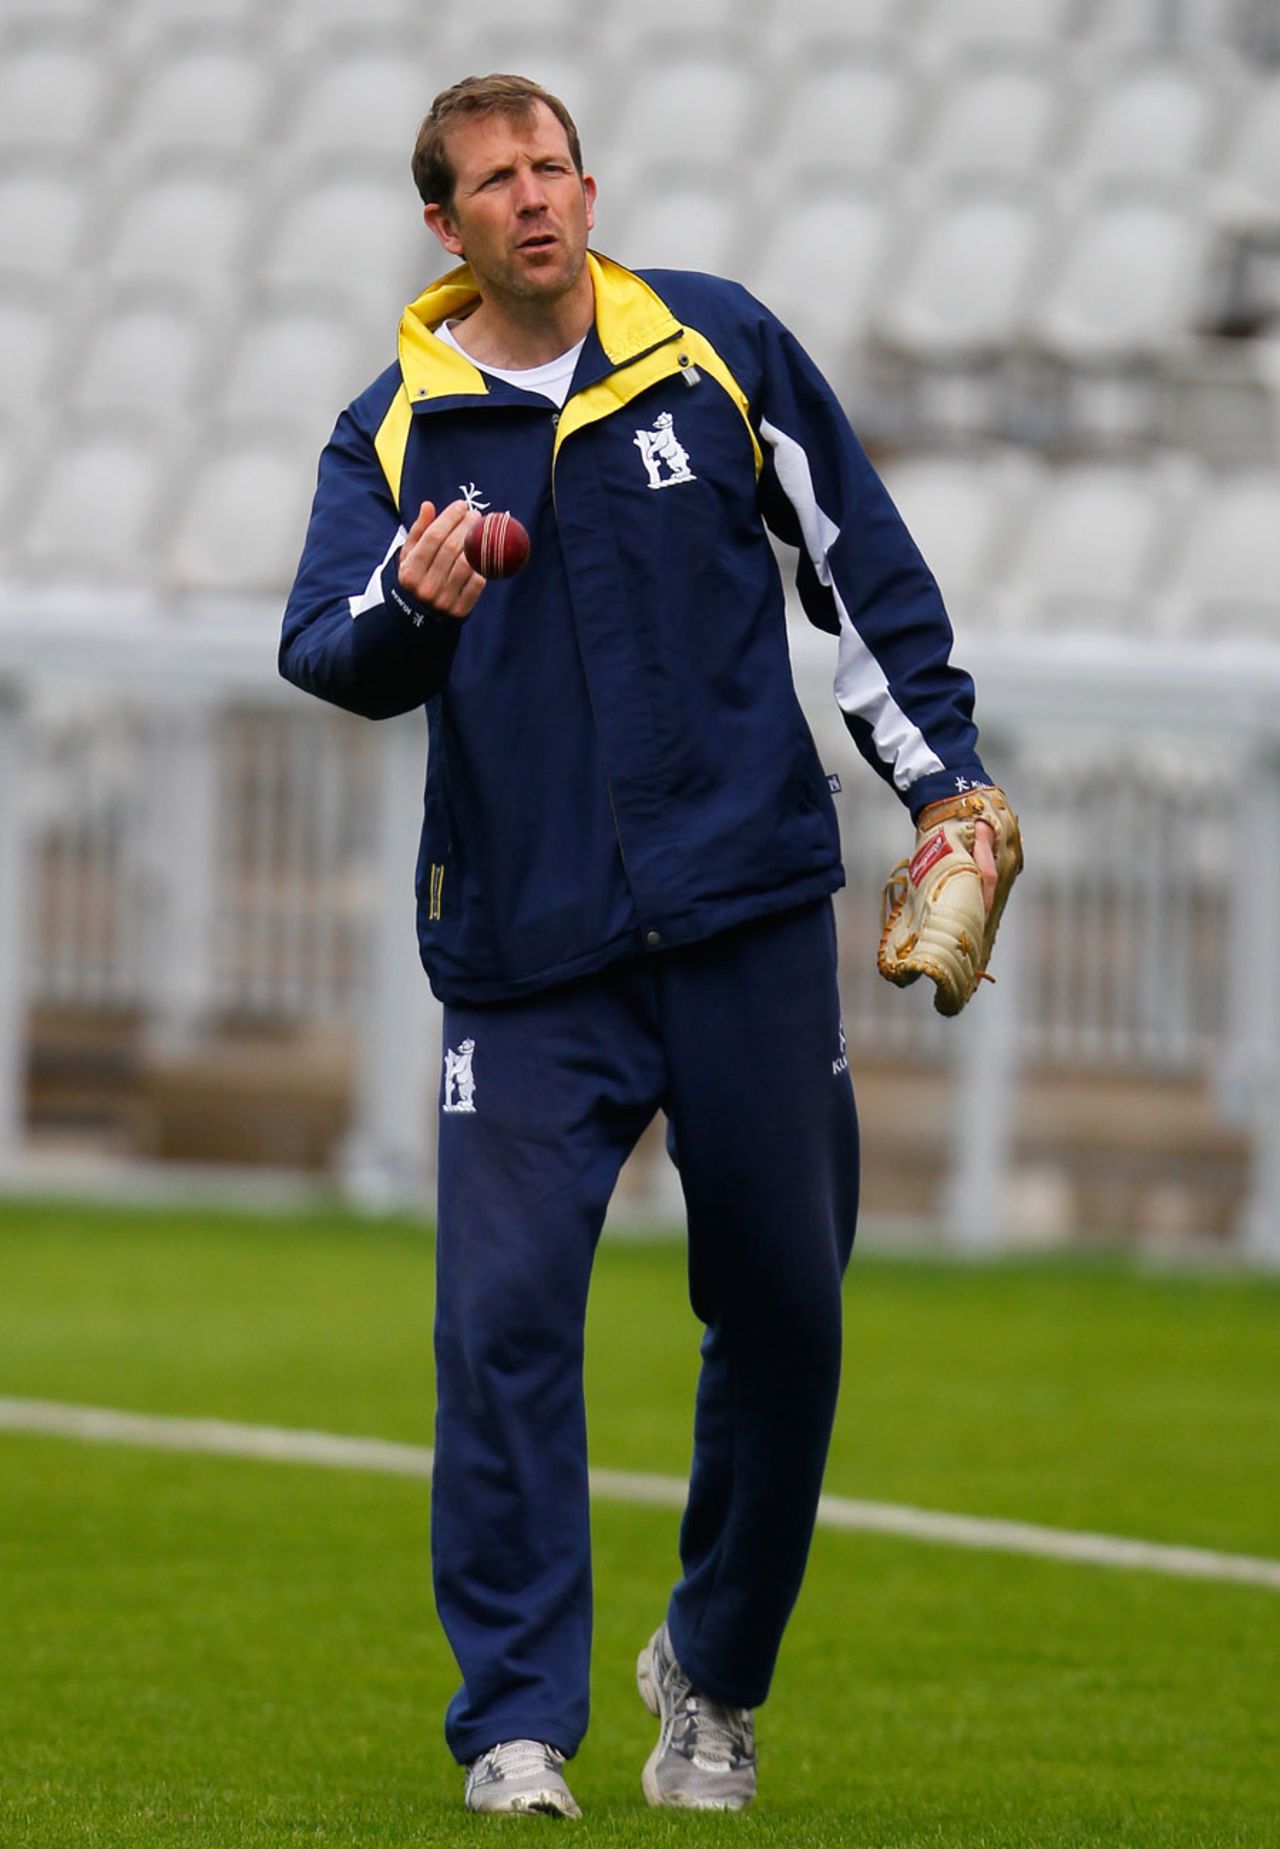 Alan Richardson recently joined Warwickshire as bowling coach, Lancashire v Warwickshire, County Championship, Division One, Old Trafford, 3rd day, April 22, 2014